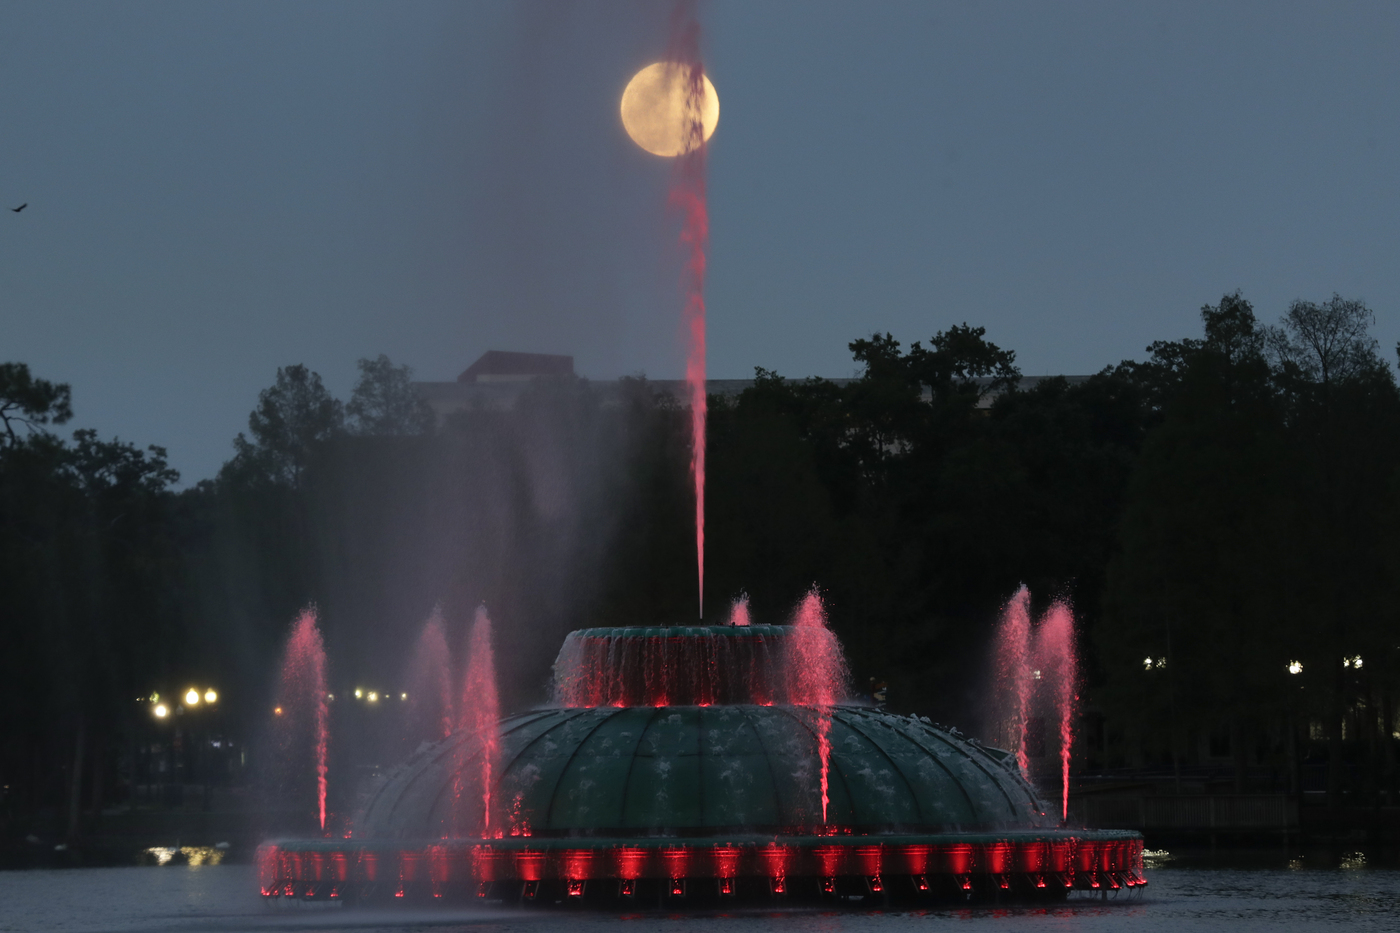 The super moon rises in the sky in front of a fountain a Lake Eola Tuesday, April 7, 2020, in (Orlando, Fla. (AP Photo/John Raoux)